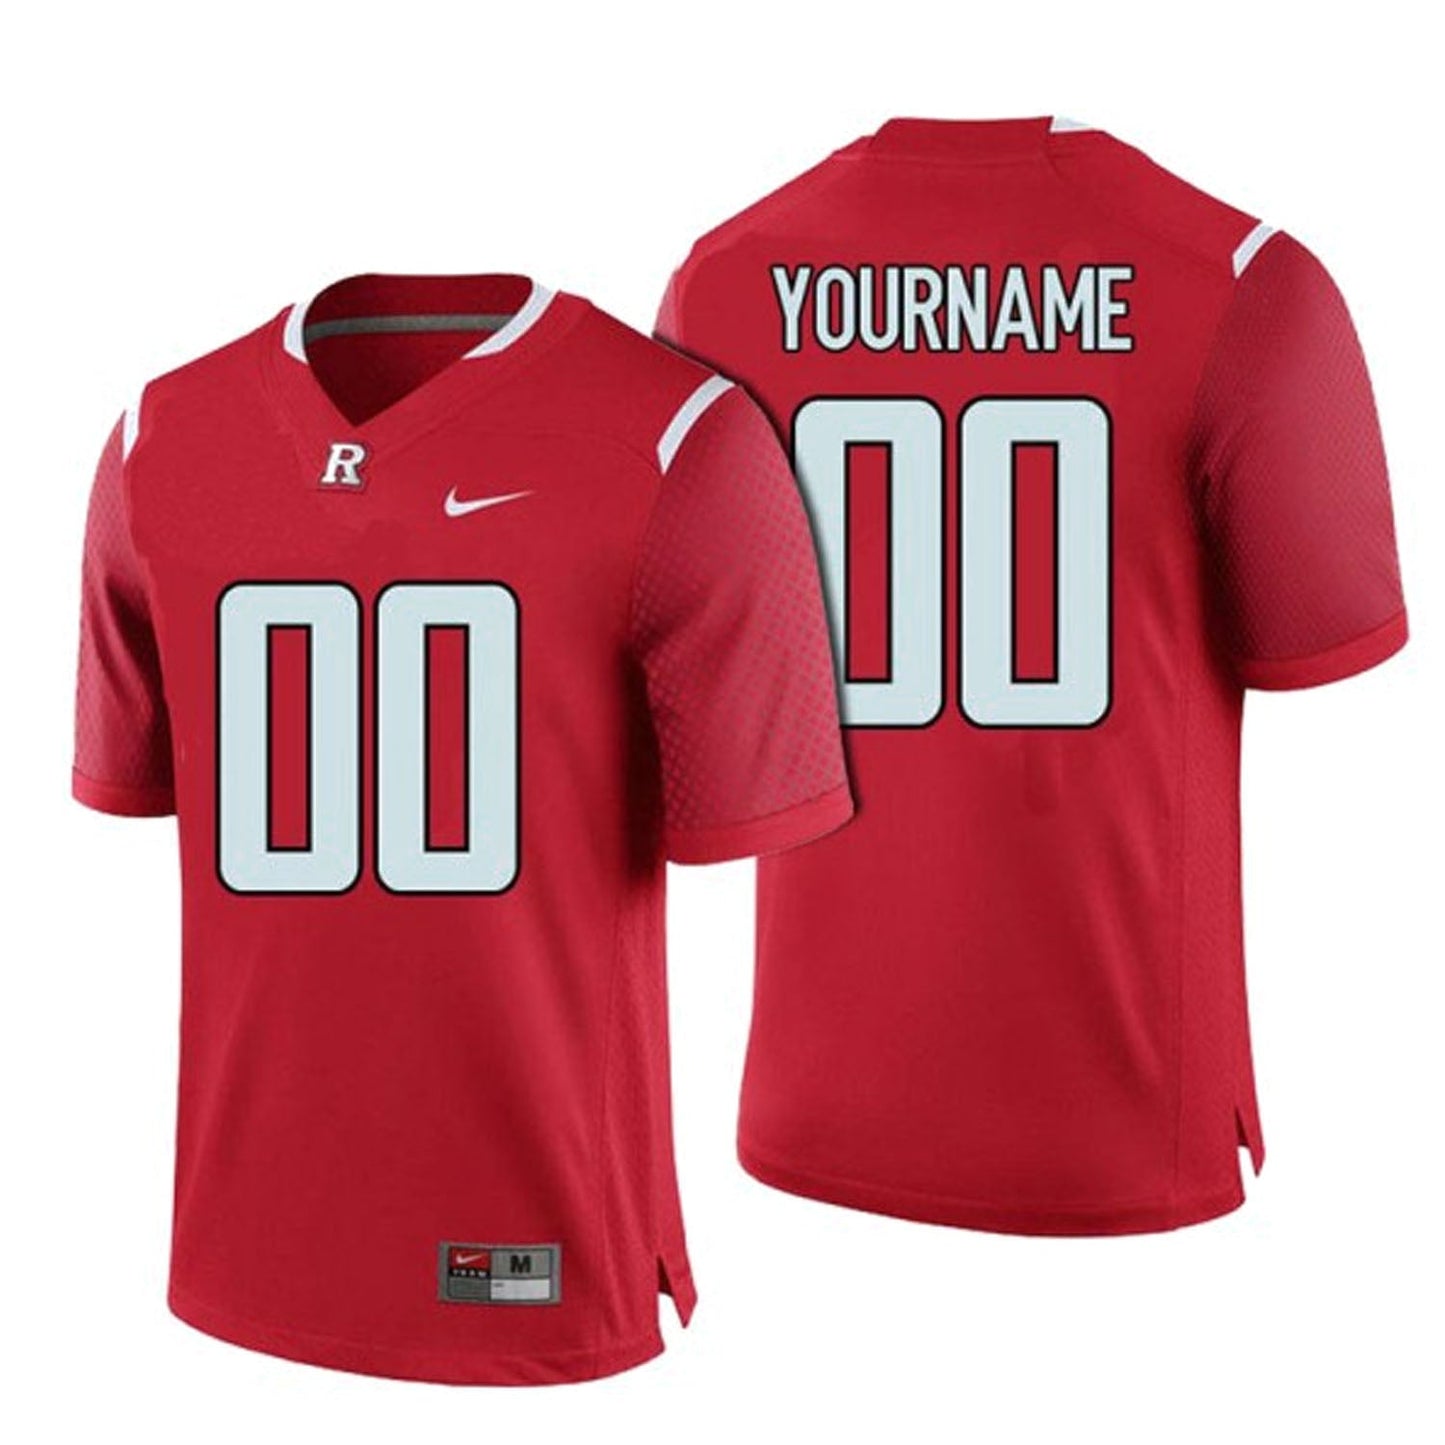 NCAAF Rutgers Scalet Knights Custom Jersey